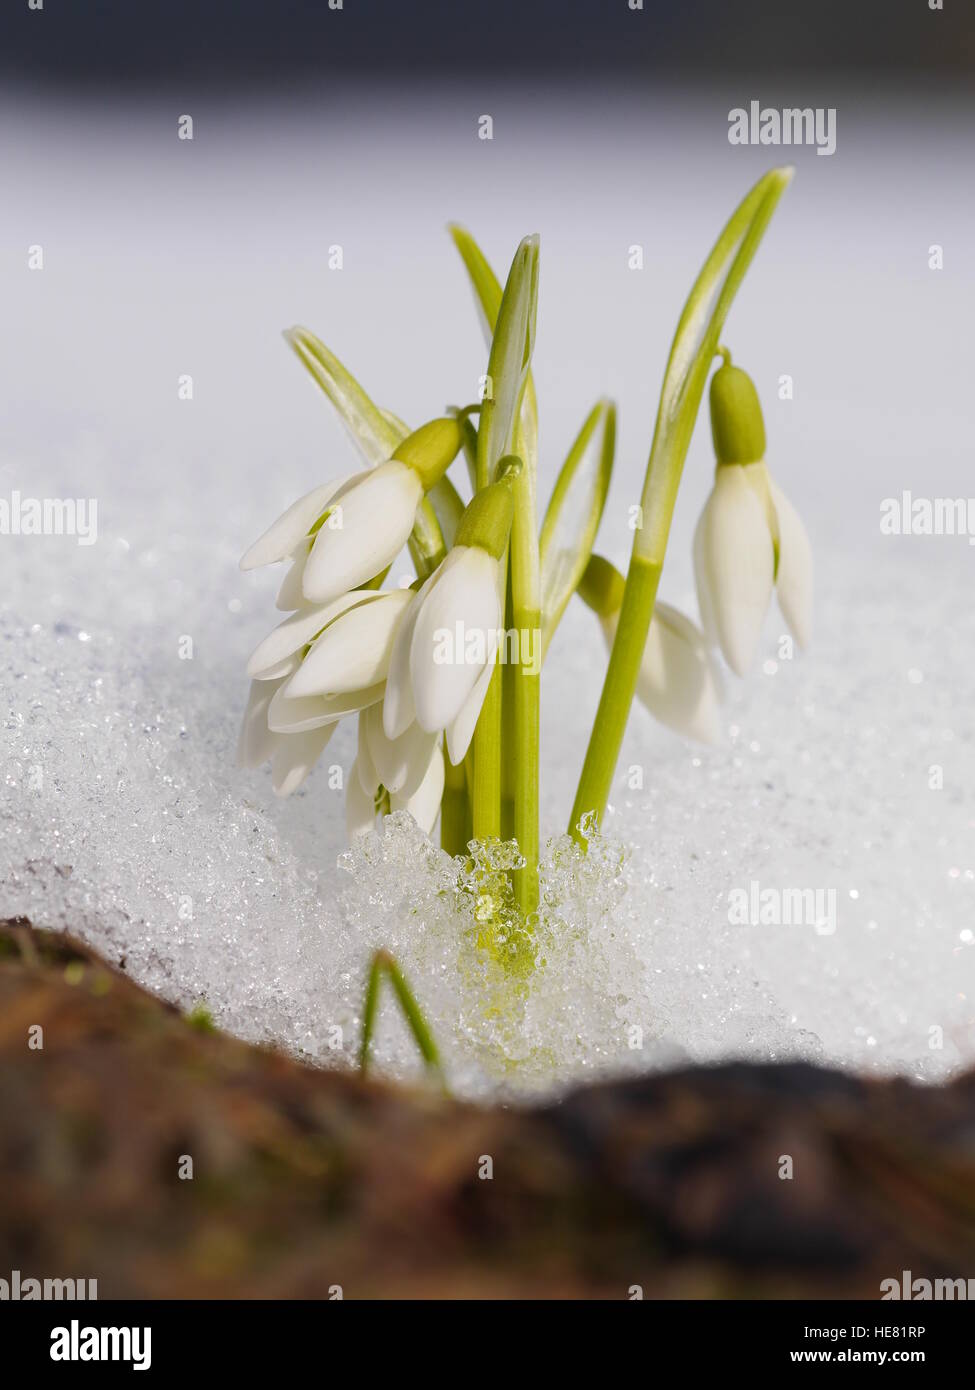 Groupe d'snowdrop flowers growing in snow Banque D'Images